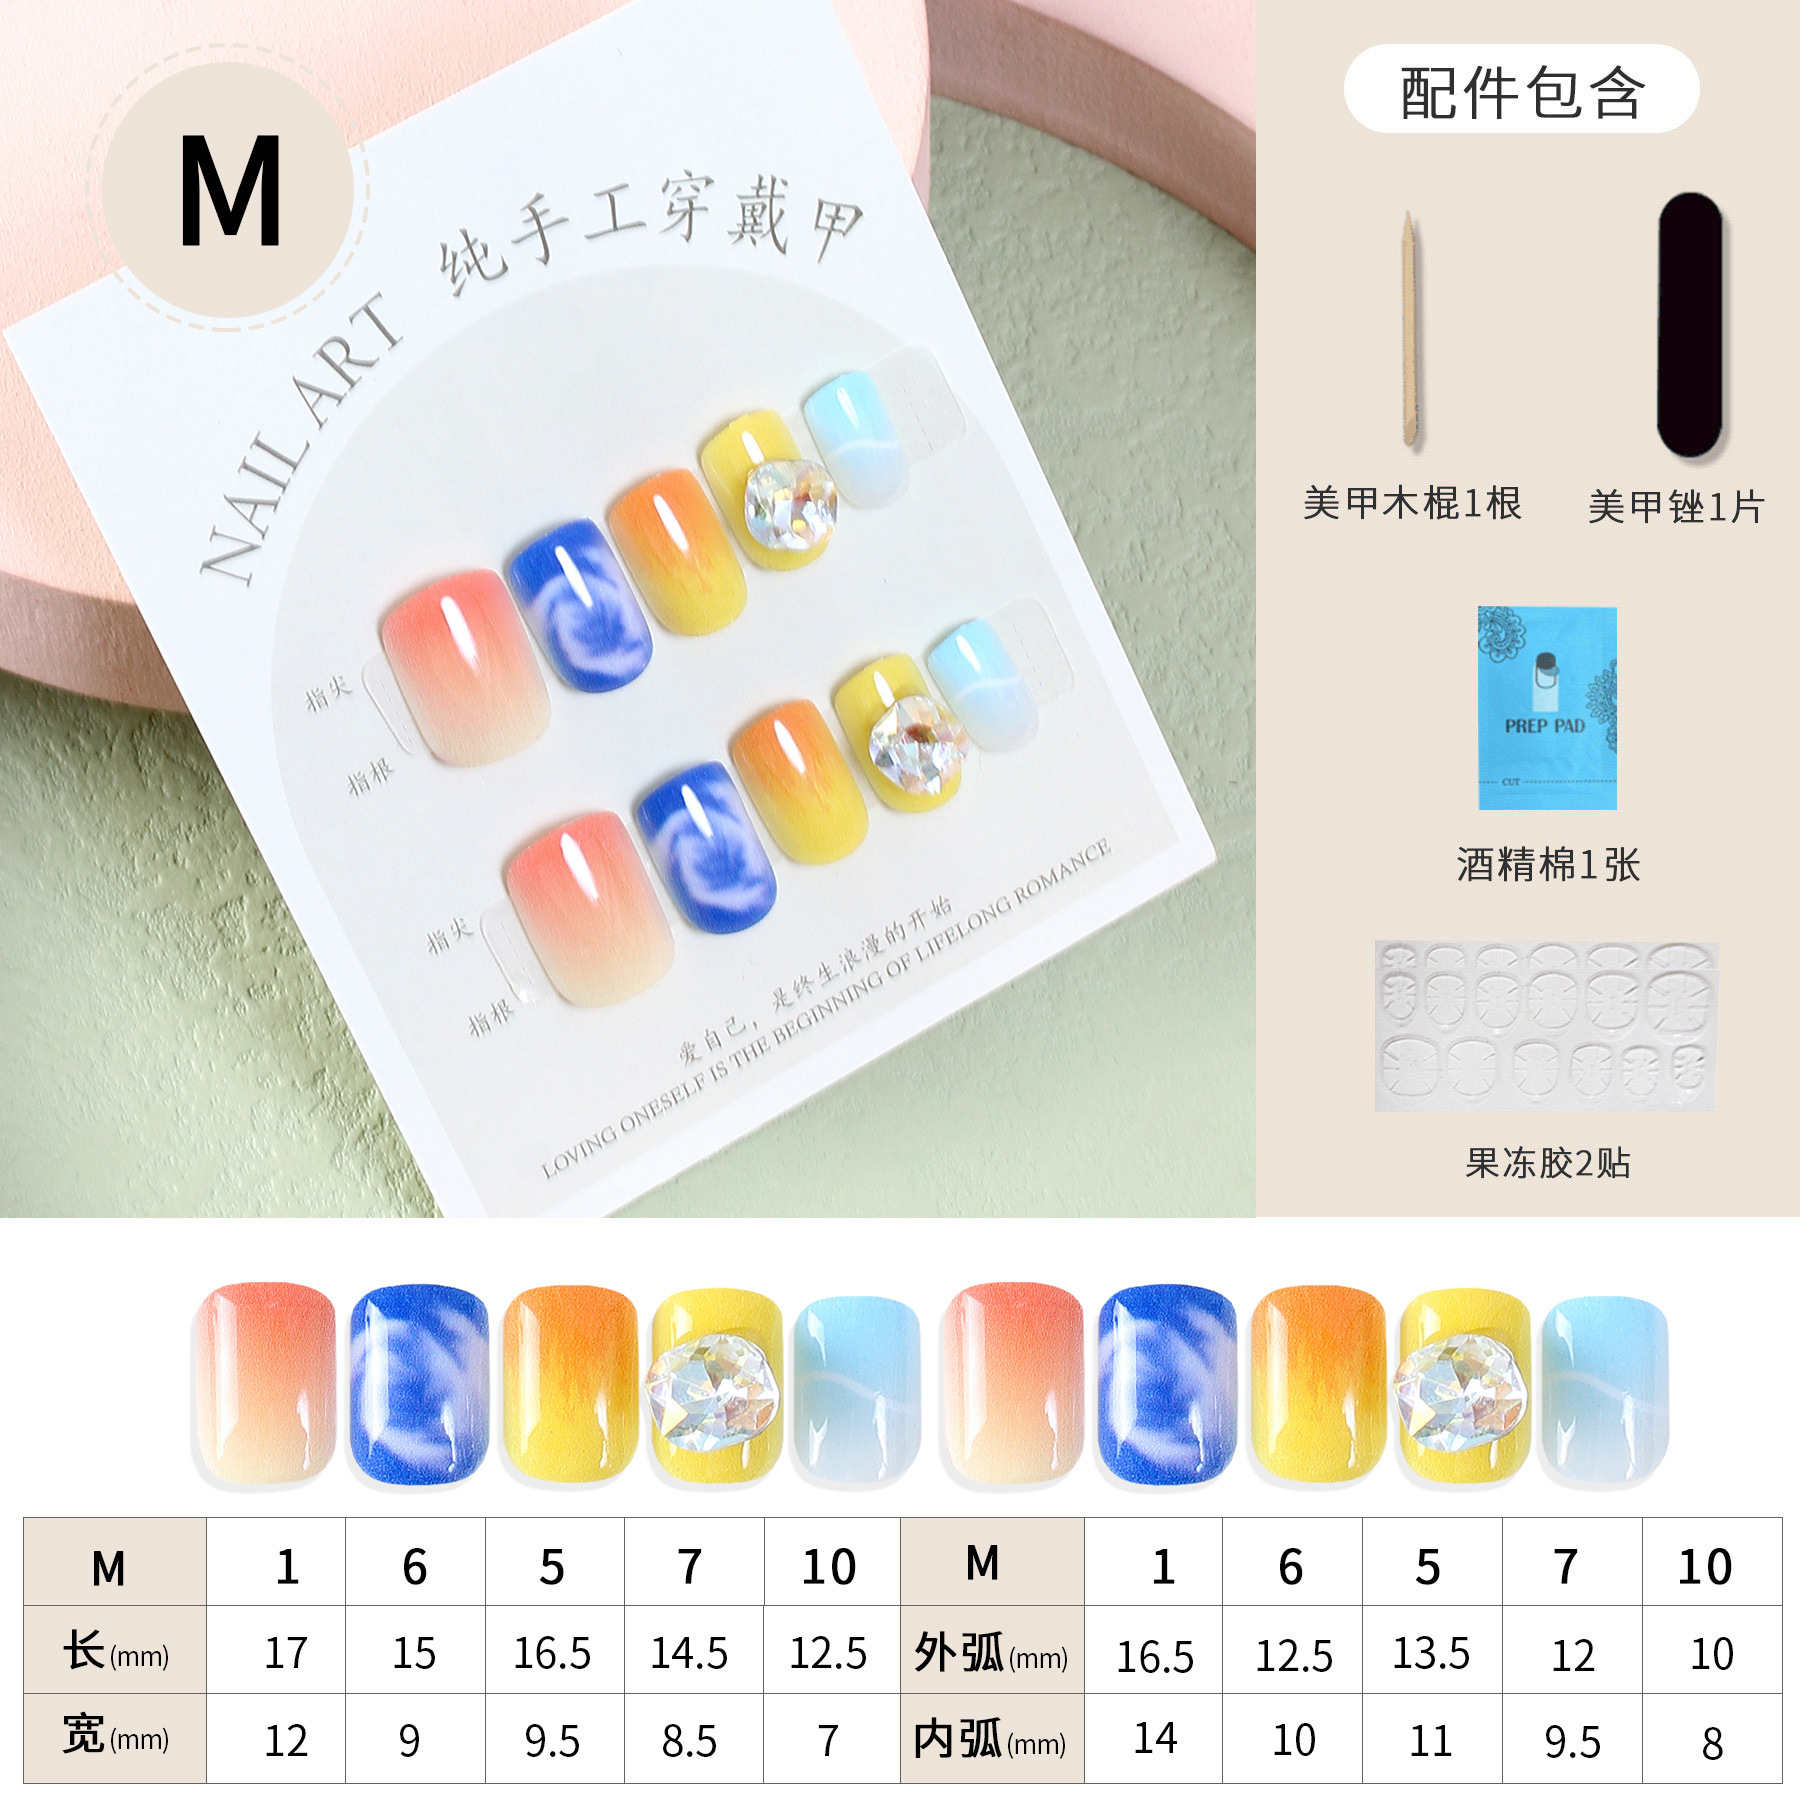 Hot-Selling New Arrival Handmade Wear Armor Sweet Small and Short Armor Fresh Blue Sky White Clouds Fake Nails Nail Stickers in Stock